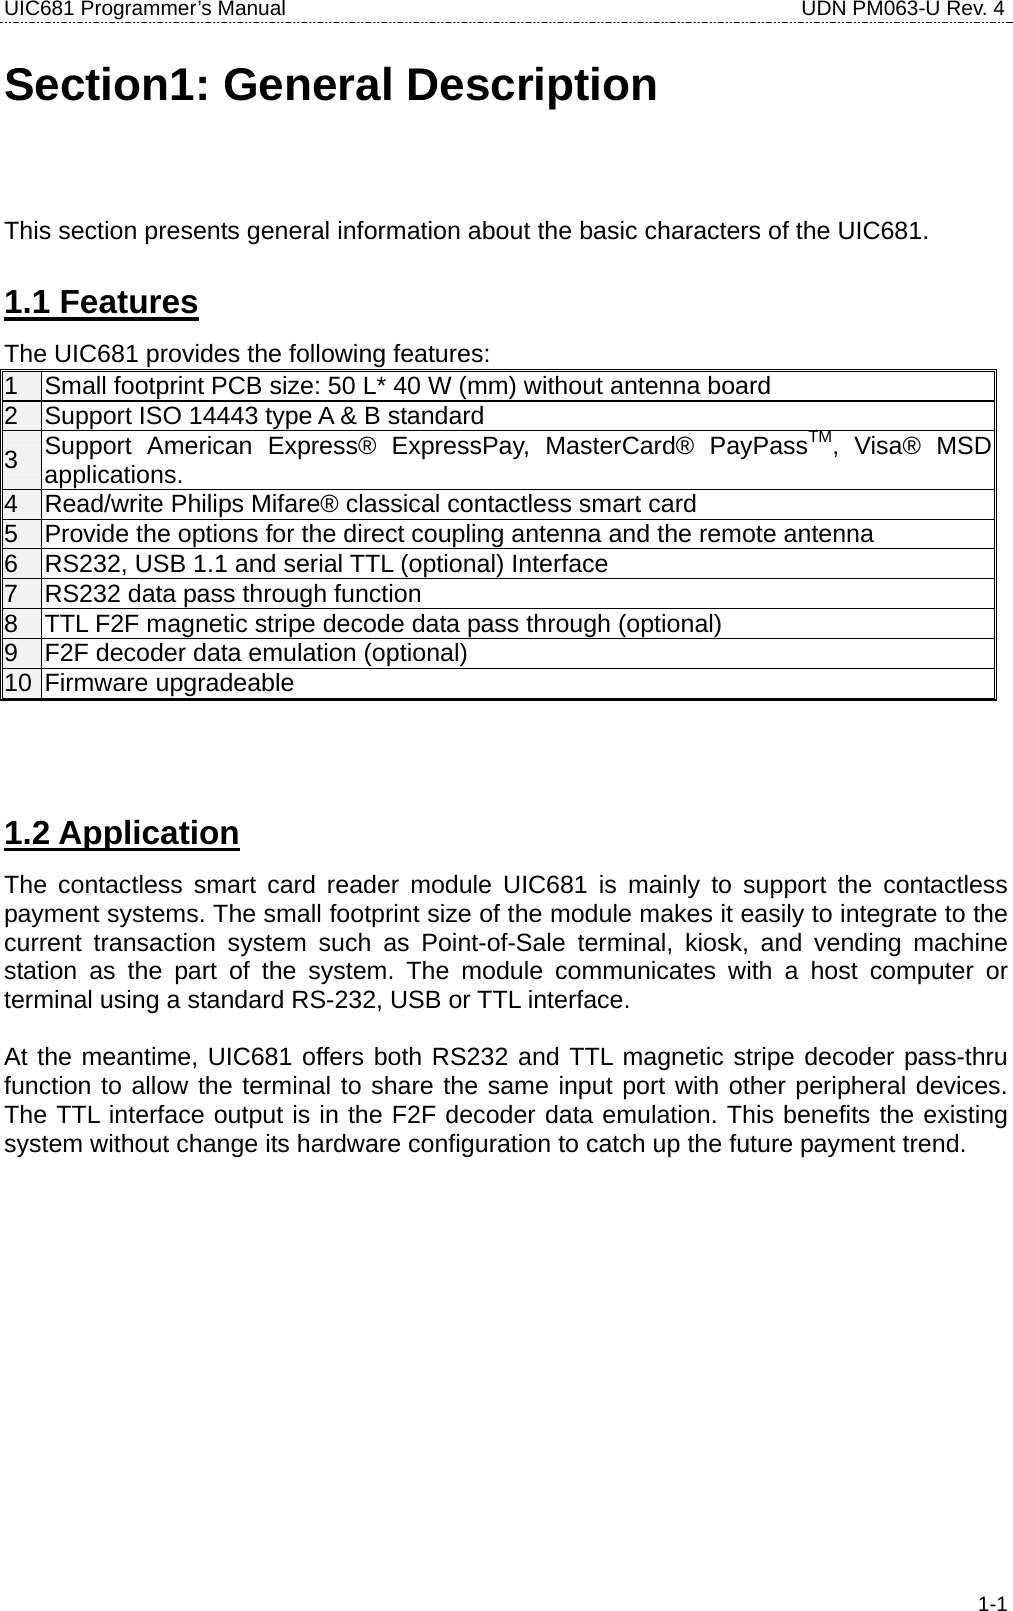 UIC681 Programmer’s Manual                                     UDN PM063-U Rev. 4  1-1Section1: General Description This section presents general information about the basic characters of the UIC681. 1.1 Features The UIC681 provides the following features: 1  Small footprint PCB size: 50 L* 40 W (mm) without antenna board 2  Support ISO 14443 type A &amp; B standard 3  Support American Express® ExpressPay, MasterCard® PayPassTM, Visa® MSD applications. 4  Read/write Philips Mifare® classical contactless smart card 5  Provide the options for the direct coupling antenna and the remote antenna 6  RS232, USB 1.1 and serial TTL (optional) Interface 7  RS232 data pass through function 8  TTL F2F magnetic stripe decode data pass through (optional) 9  F2F decoder data emulation (optional) 10 Firmware upgradeable   1.2 Application The contactless smart card reader module UIC681 is mainly to support the contactless payment systems. The small footprint size of the module makes it easily to integrate to the current transaction system such as Point-of-Sale terminal, kiosk, and vending machine station as the part of the system. The module communicates with a host computer or terminal using a standard RS-232, USB or TTL interface.  At the meantime, UIC681 offers both RS232 and TTL magnetic stripe decoder pass-thru function to allow the terminal to share the same input port with other peripheral devices. The TTL interface output is in the F2F decoder data emulation. This benefits the existing system without change its hardware configuration to catch up the future payment trend.   